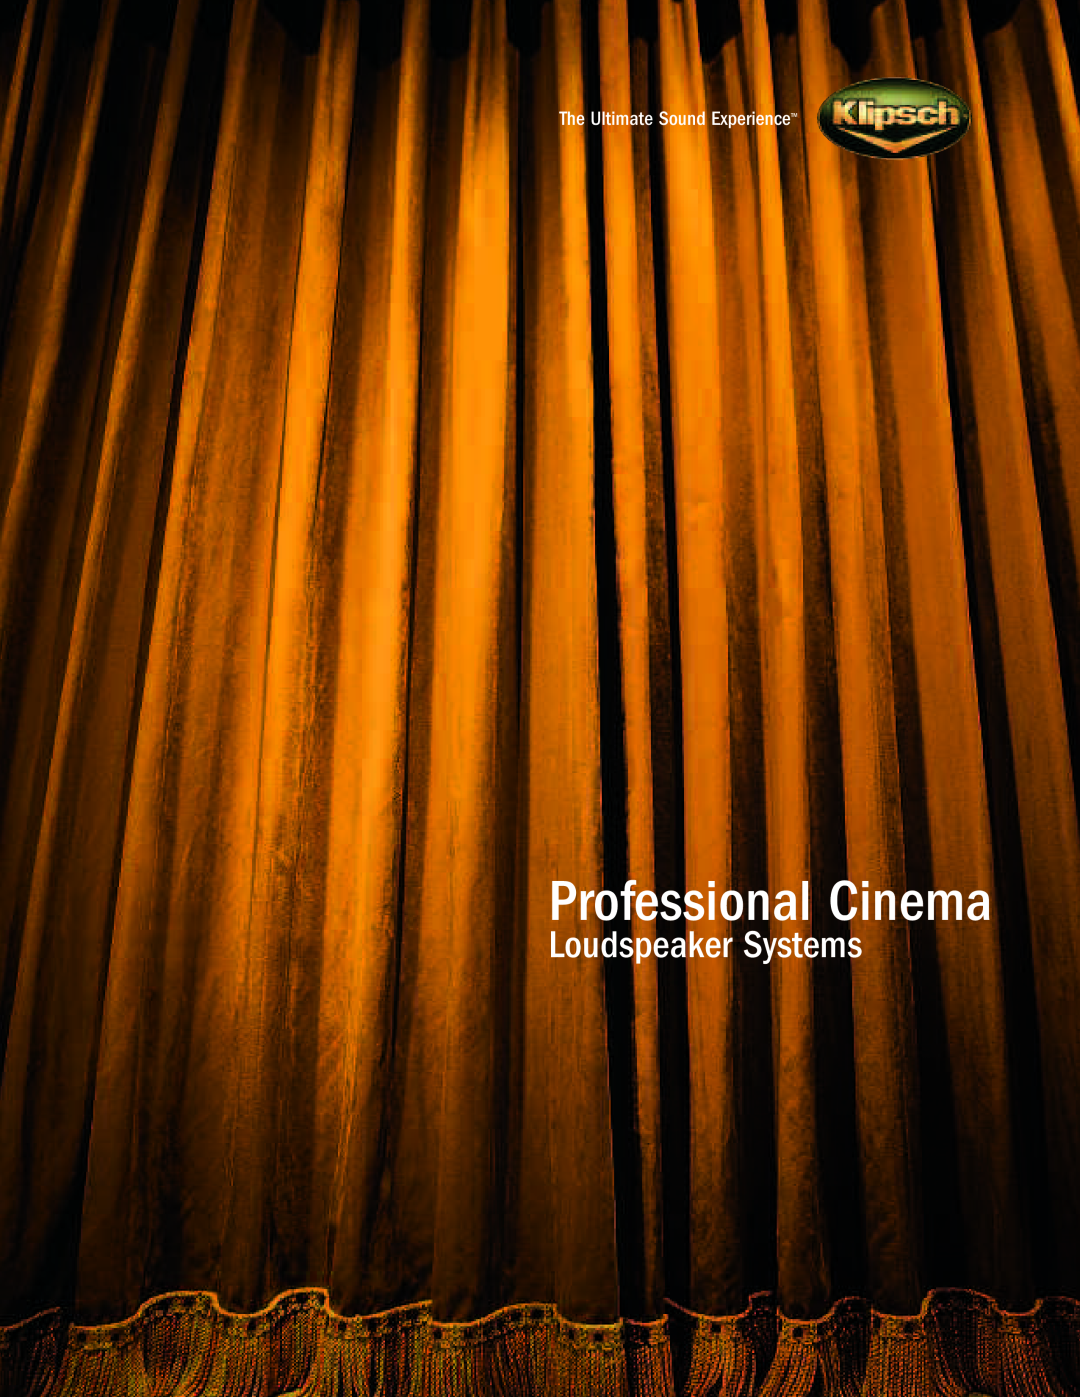 Klipsch manual Loudspeaker Systems, The Ultimate Sound Experience, Professional Cinema 